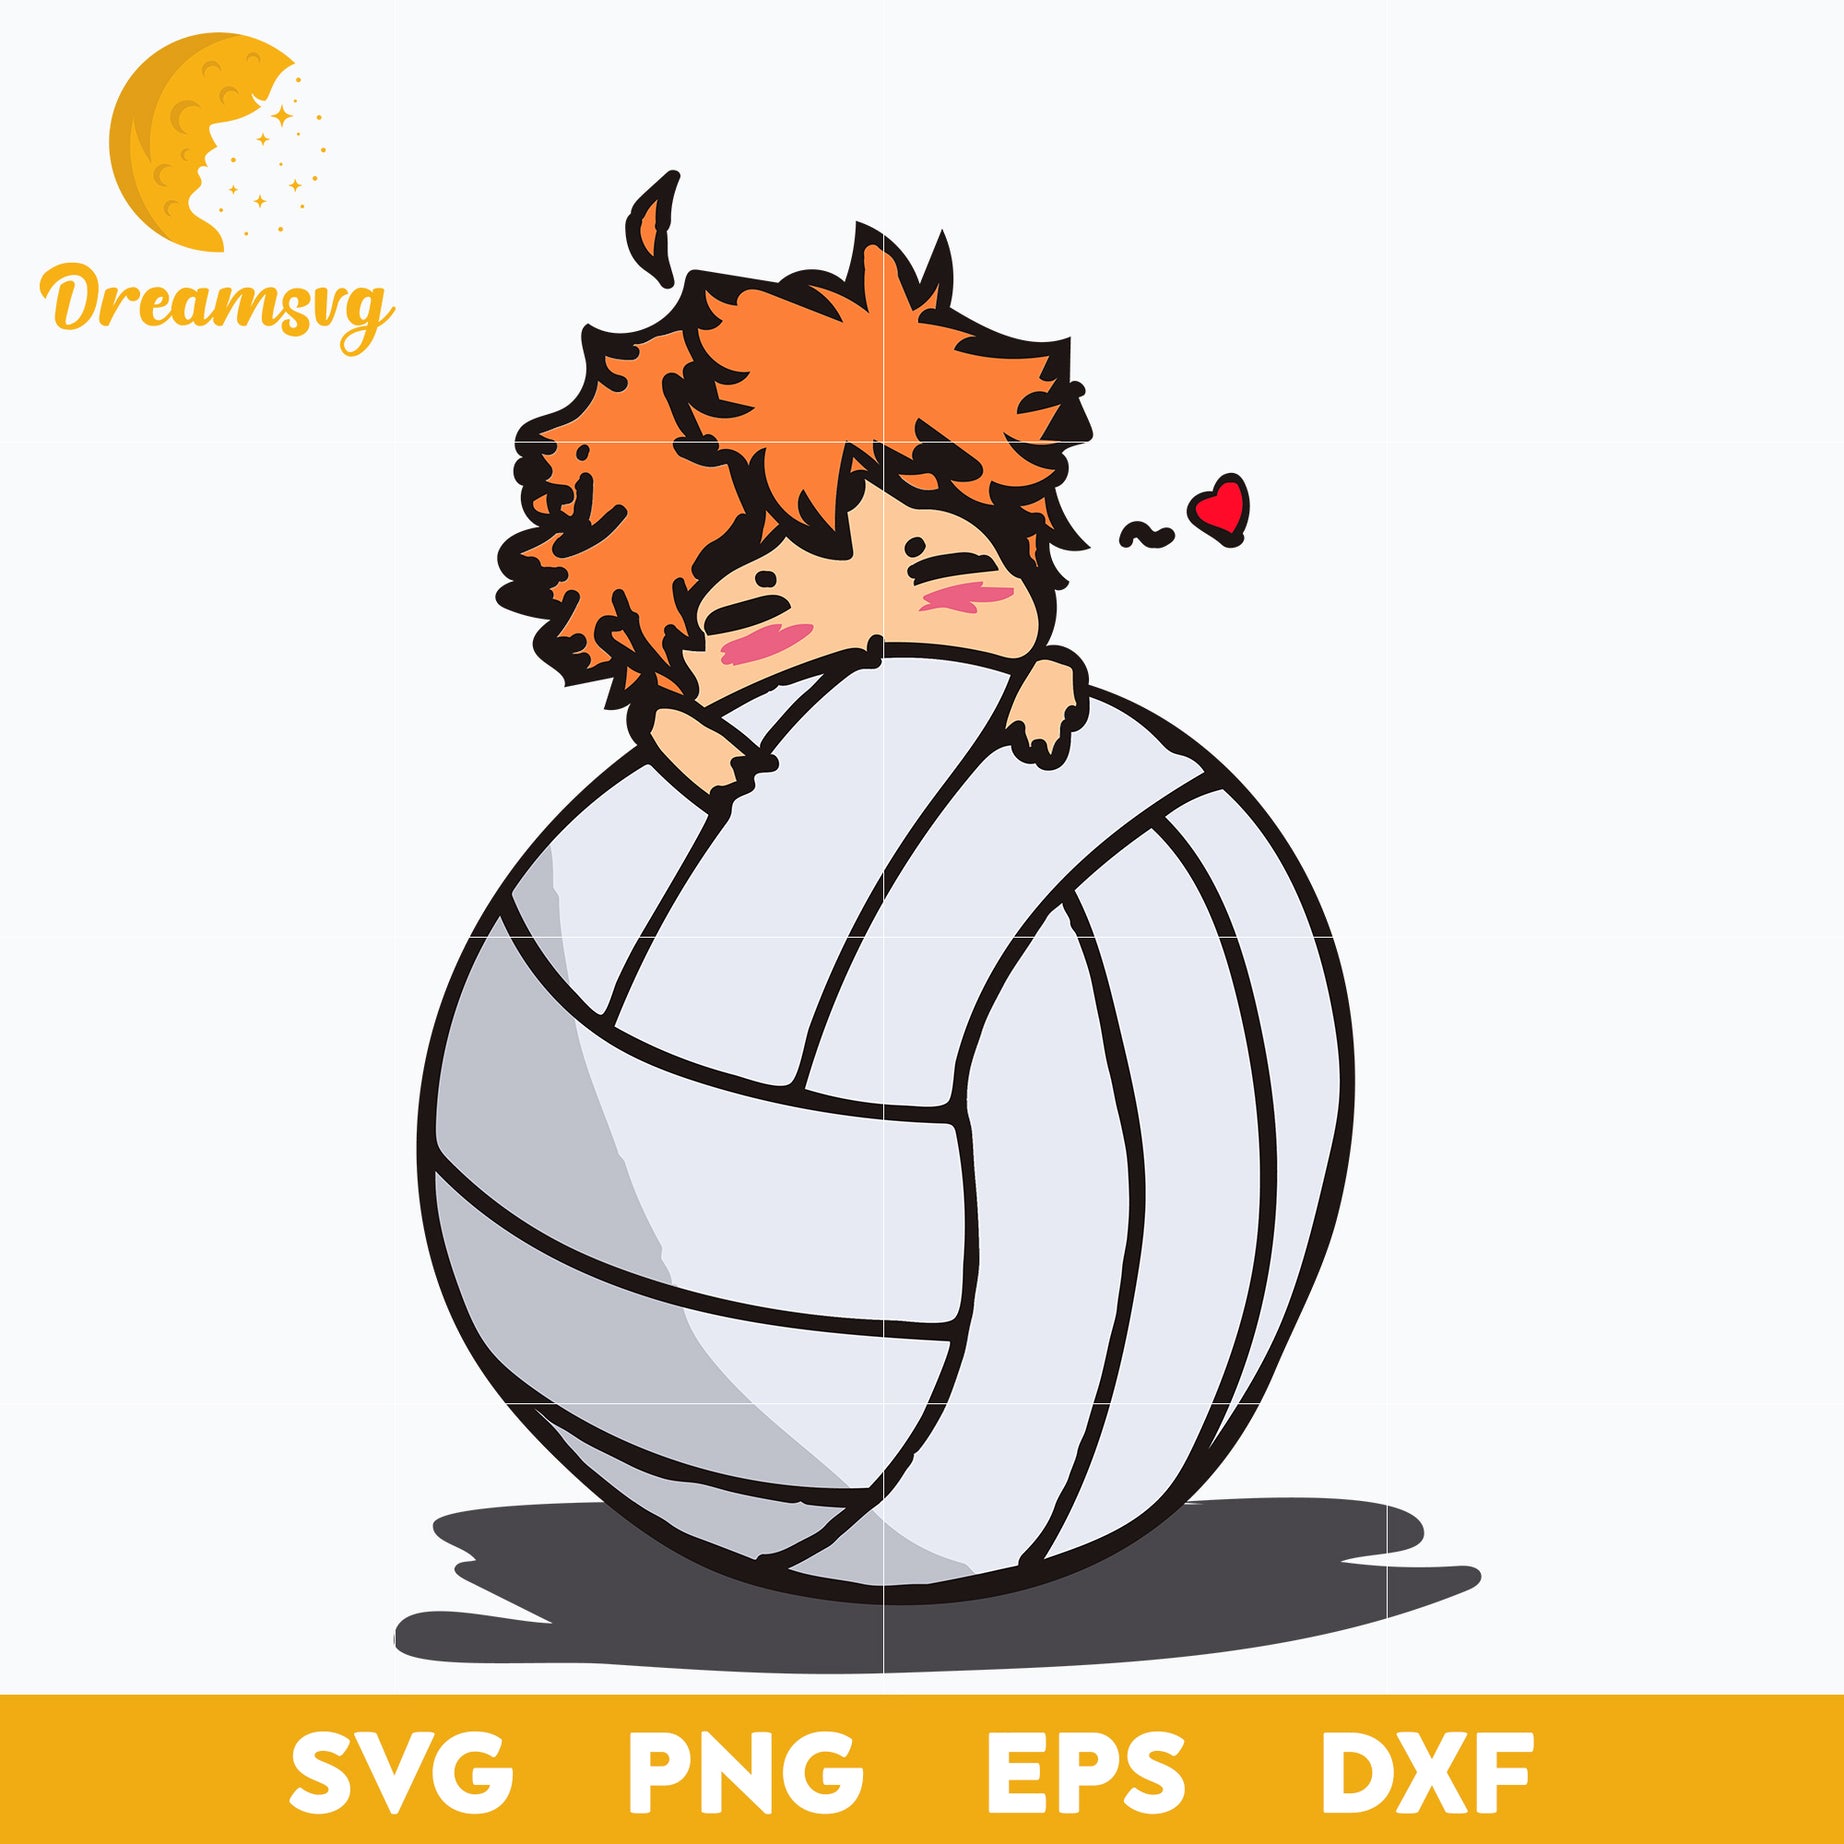 Hinata Shouyou Svg, Haikyuu Love Volleyball Svg, file for cricut, Anime svg, png, eps, dxf digital download